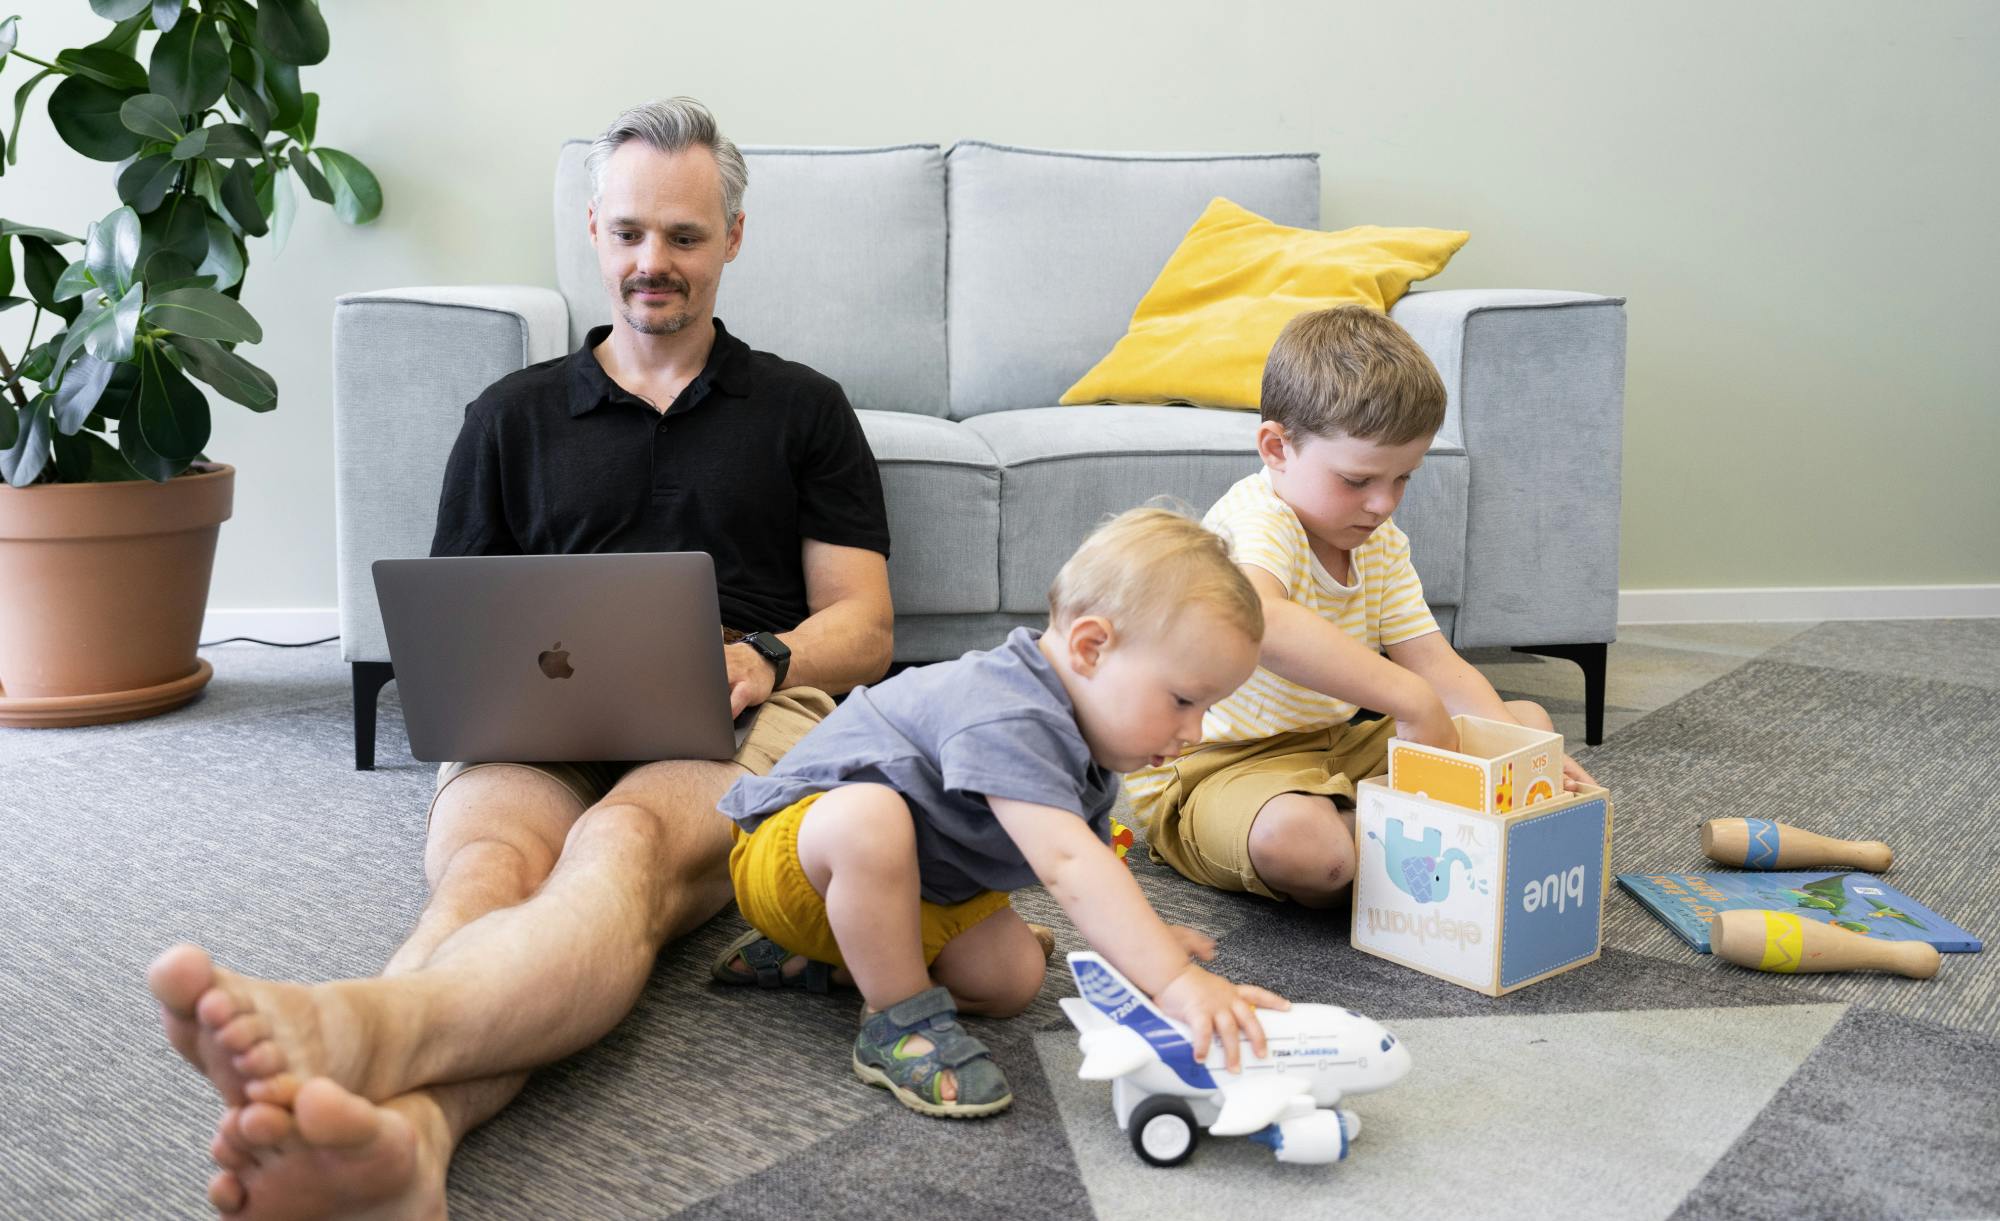 solution architect with a laptop on his lap sitting on the floor next to his children